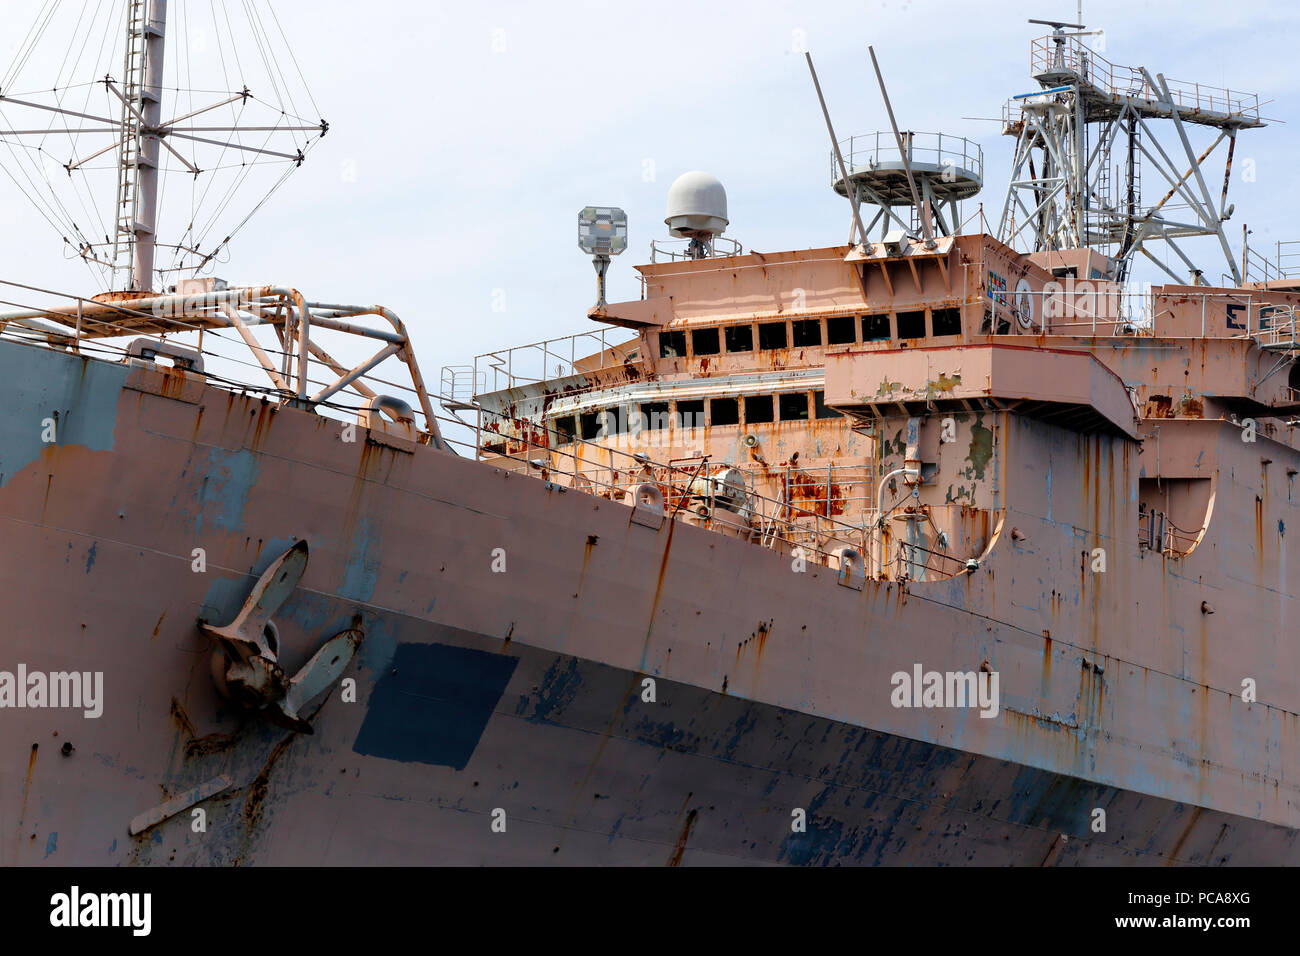 A decomissioned ship at the Philadelphia Navy Yard Stock Photo